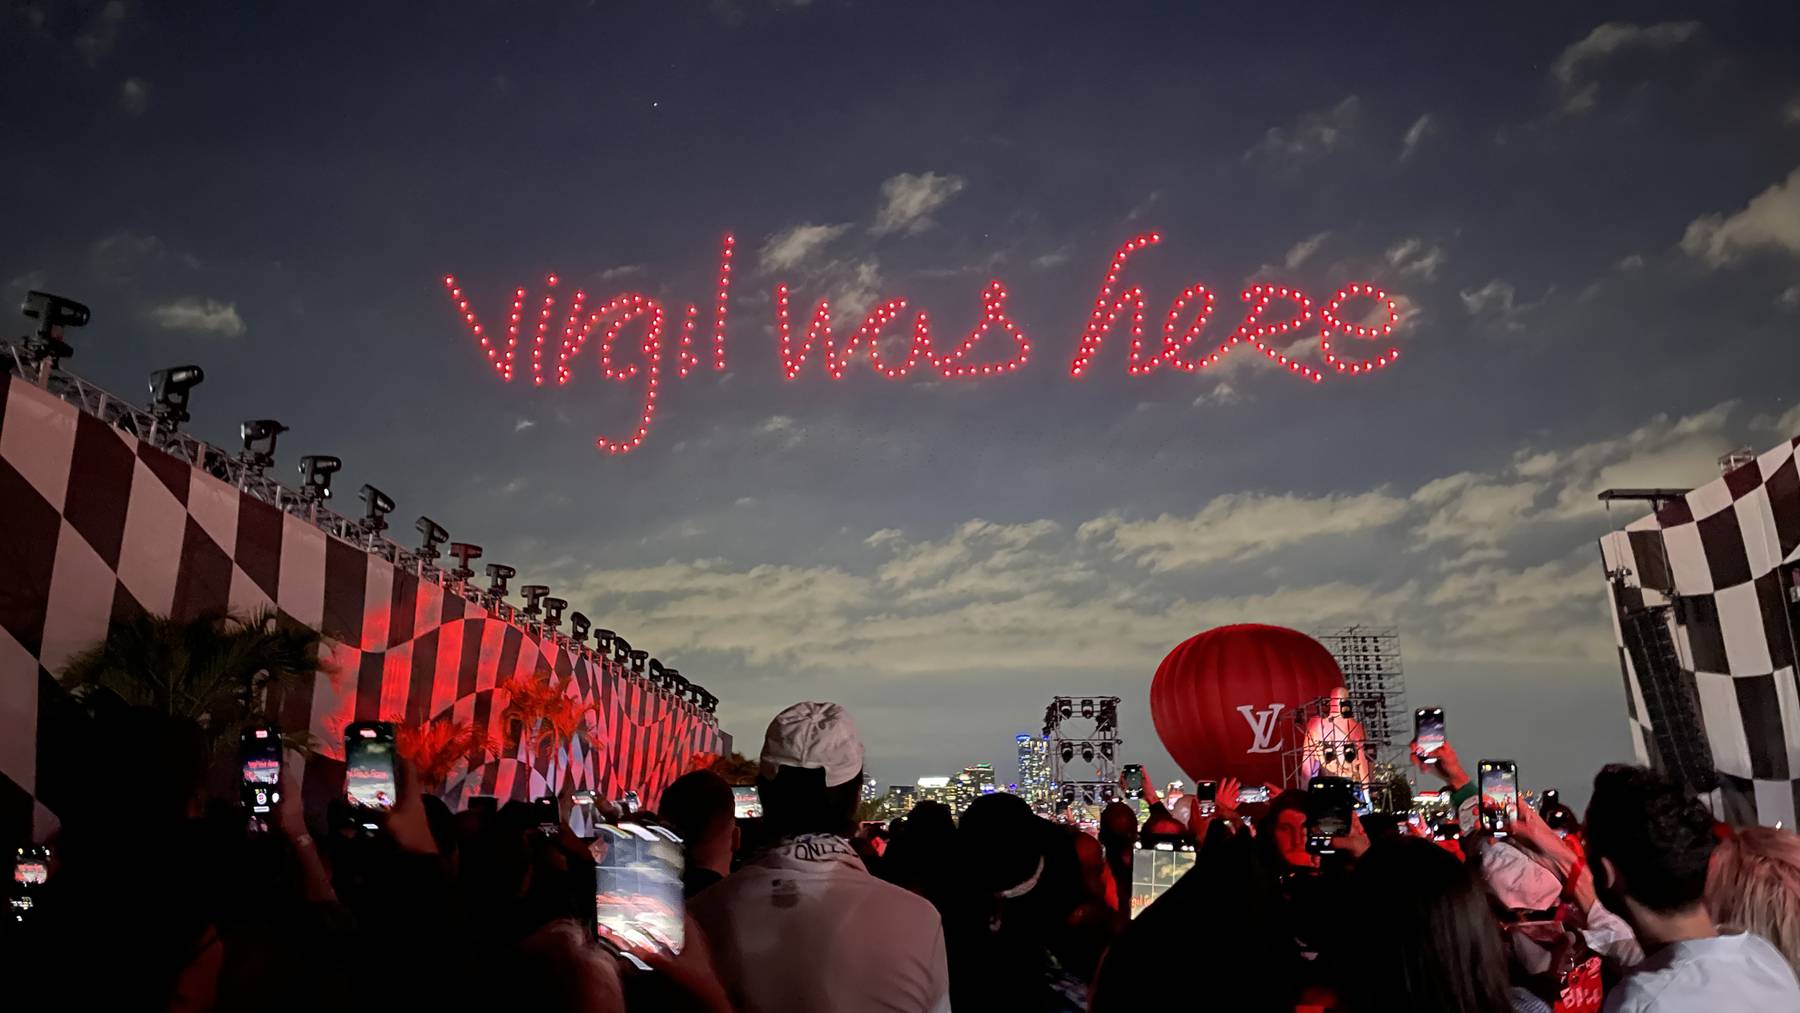 A light show after the Louis Vuitton runway show that paid tribute to the late designer Virgil Abloh.